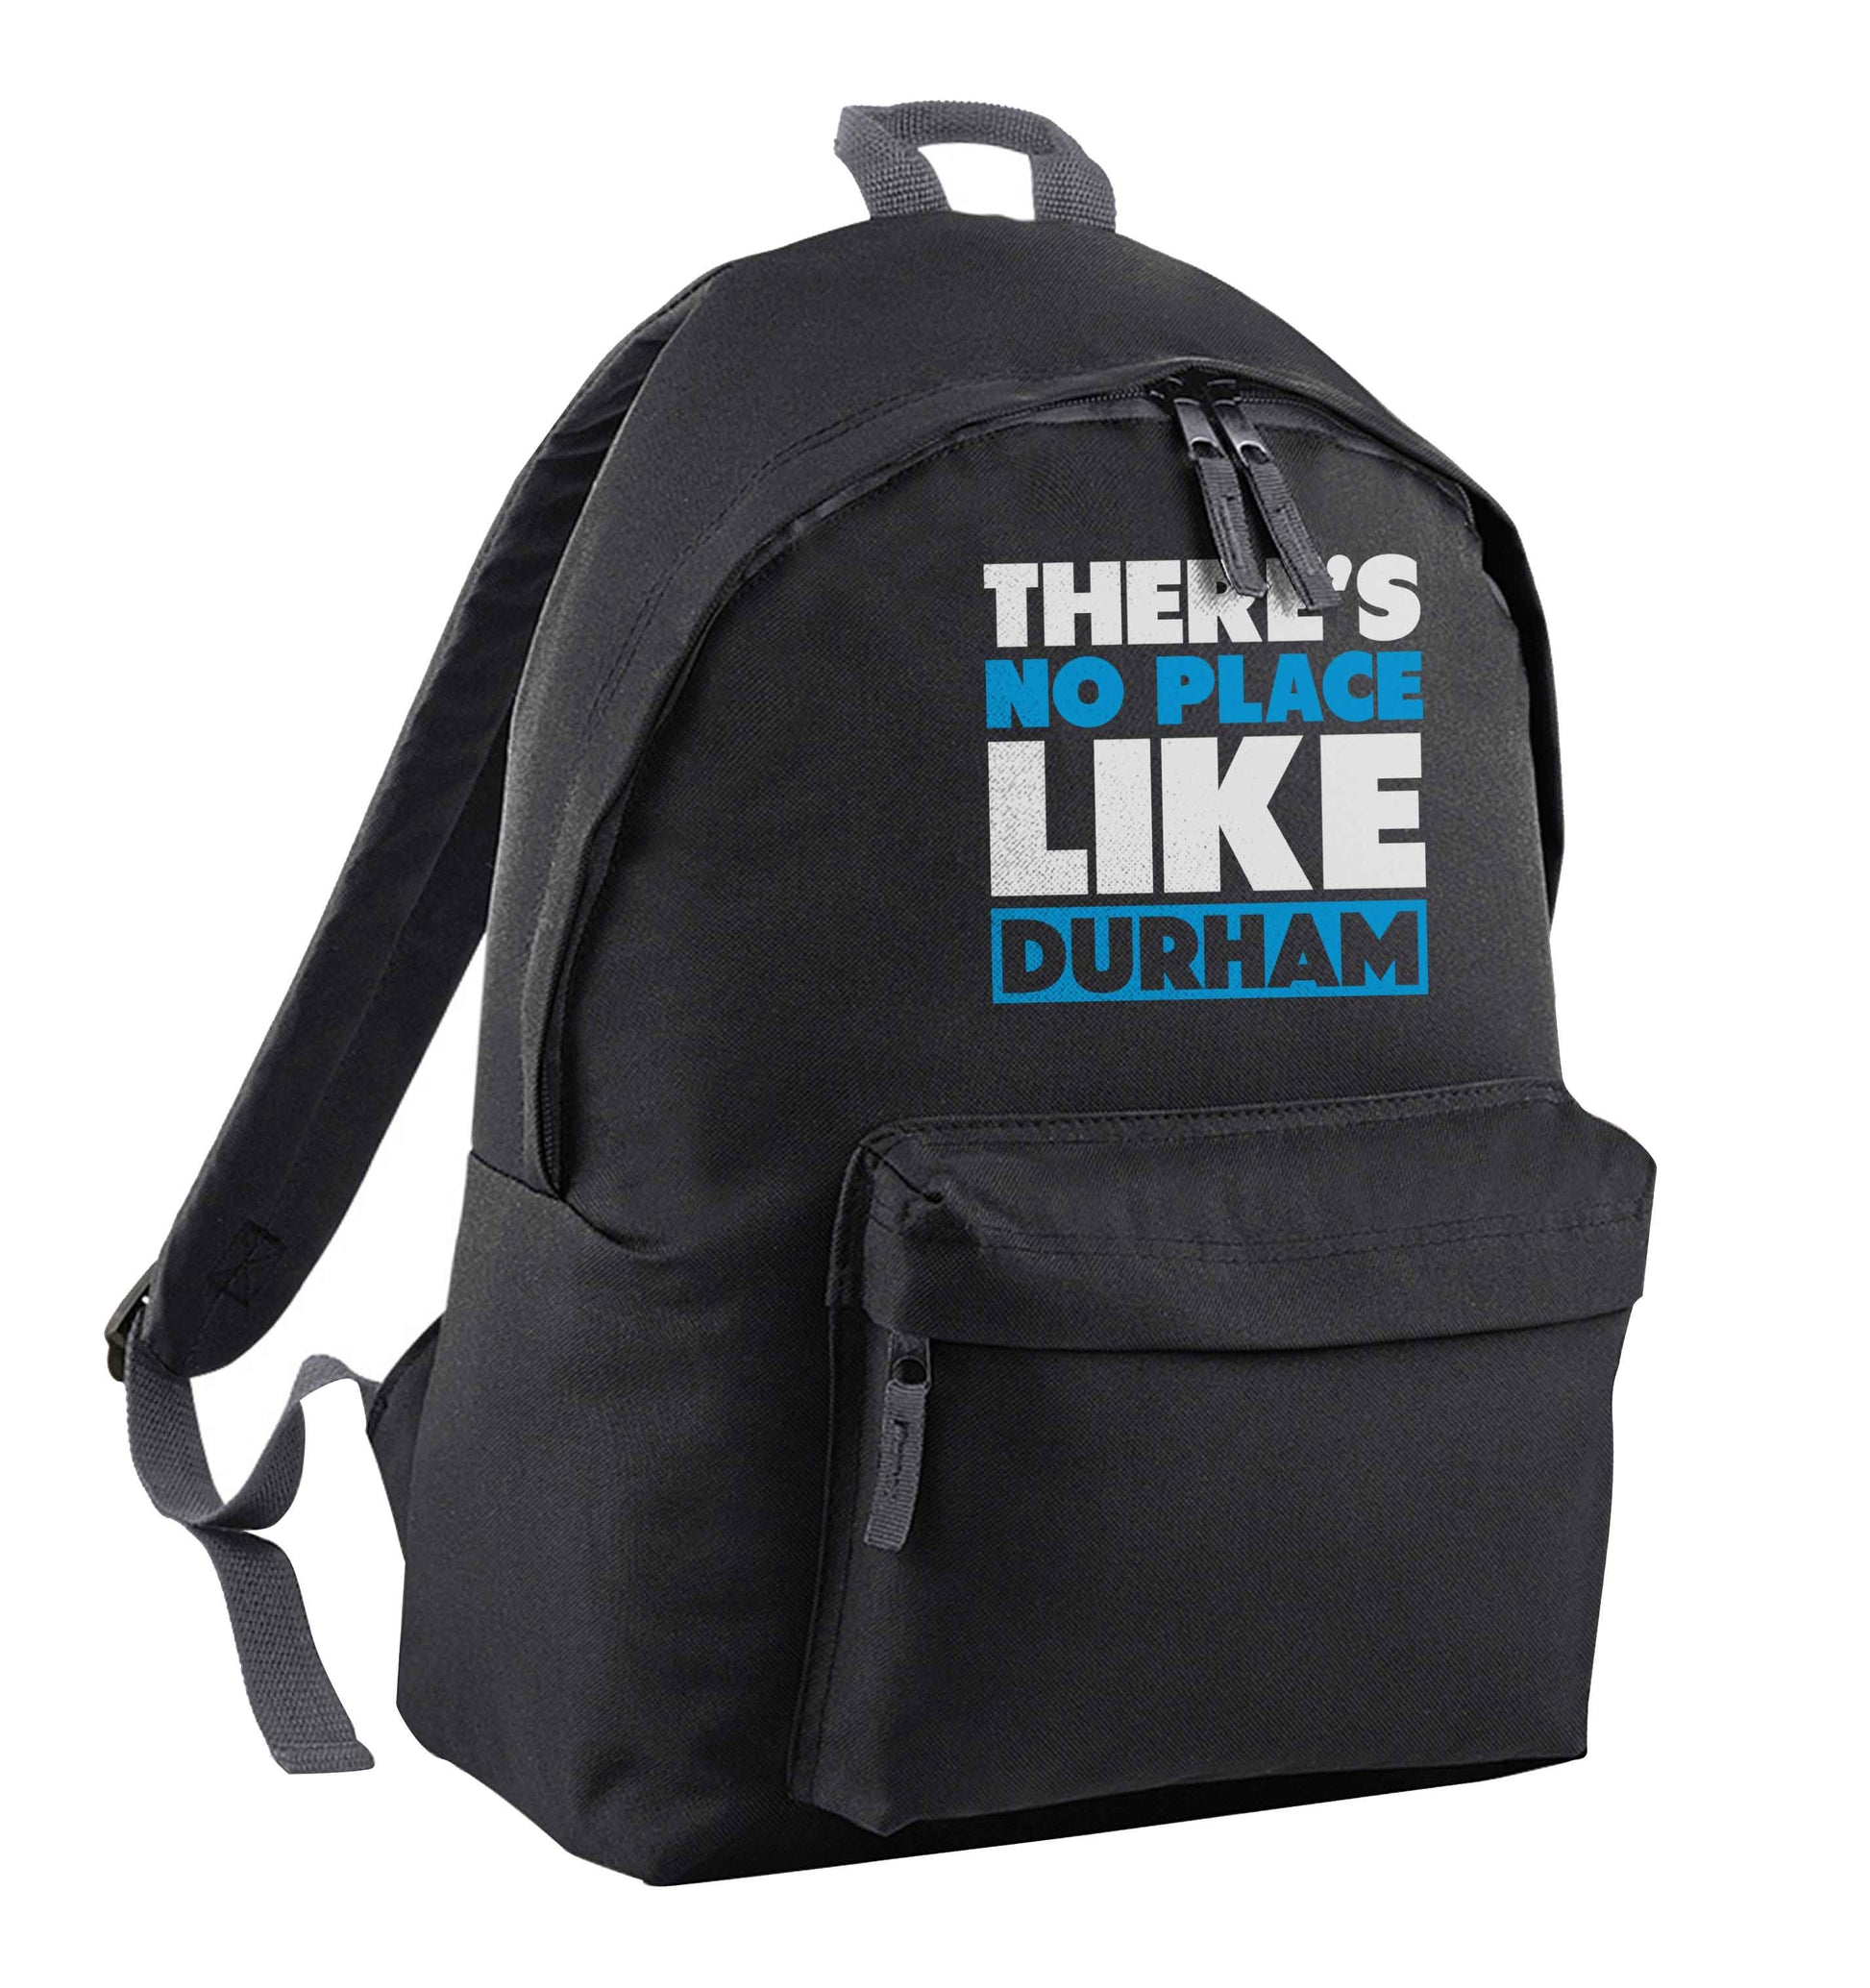 There's no place like Durham black children's backpack